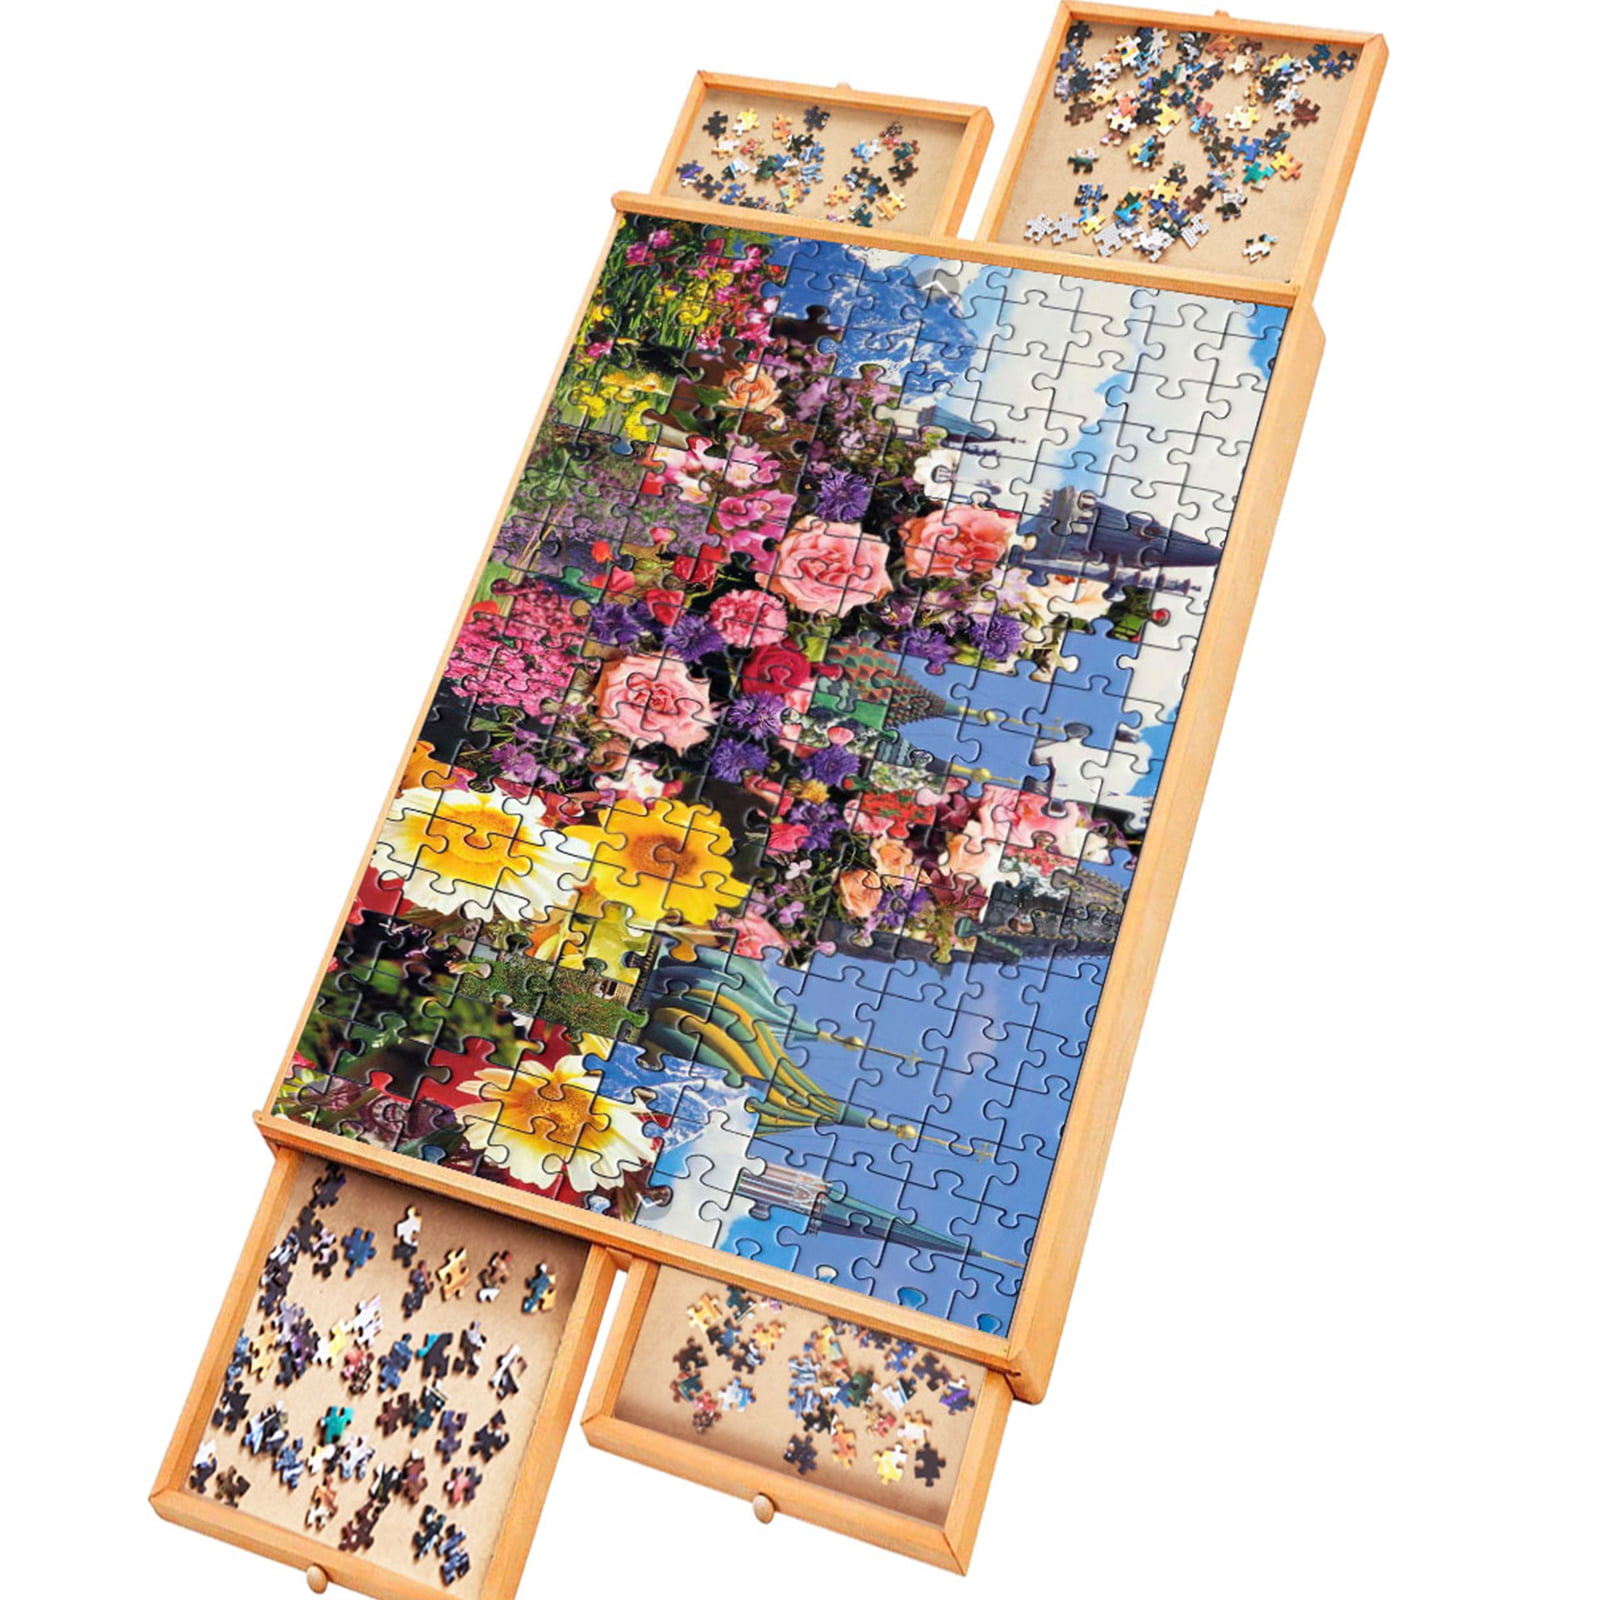  Puzzle Board, Wooden Puzzle Board,Puzzle Tables for Adults,  Puzzle Boards and 4 Storage & Sorting Drawers, 10 Glue Sheet & 4 Hangers, Puzzle  Tray, Puzzle Table, Jumbo Size: 29×21, Up to